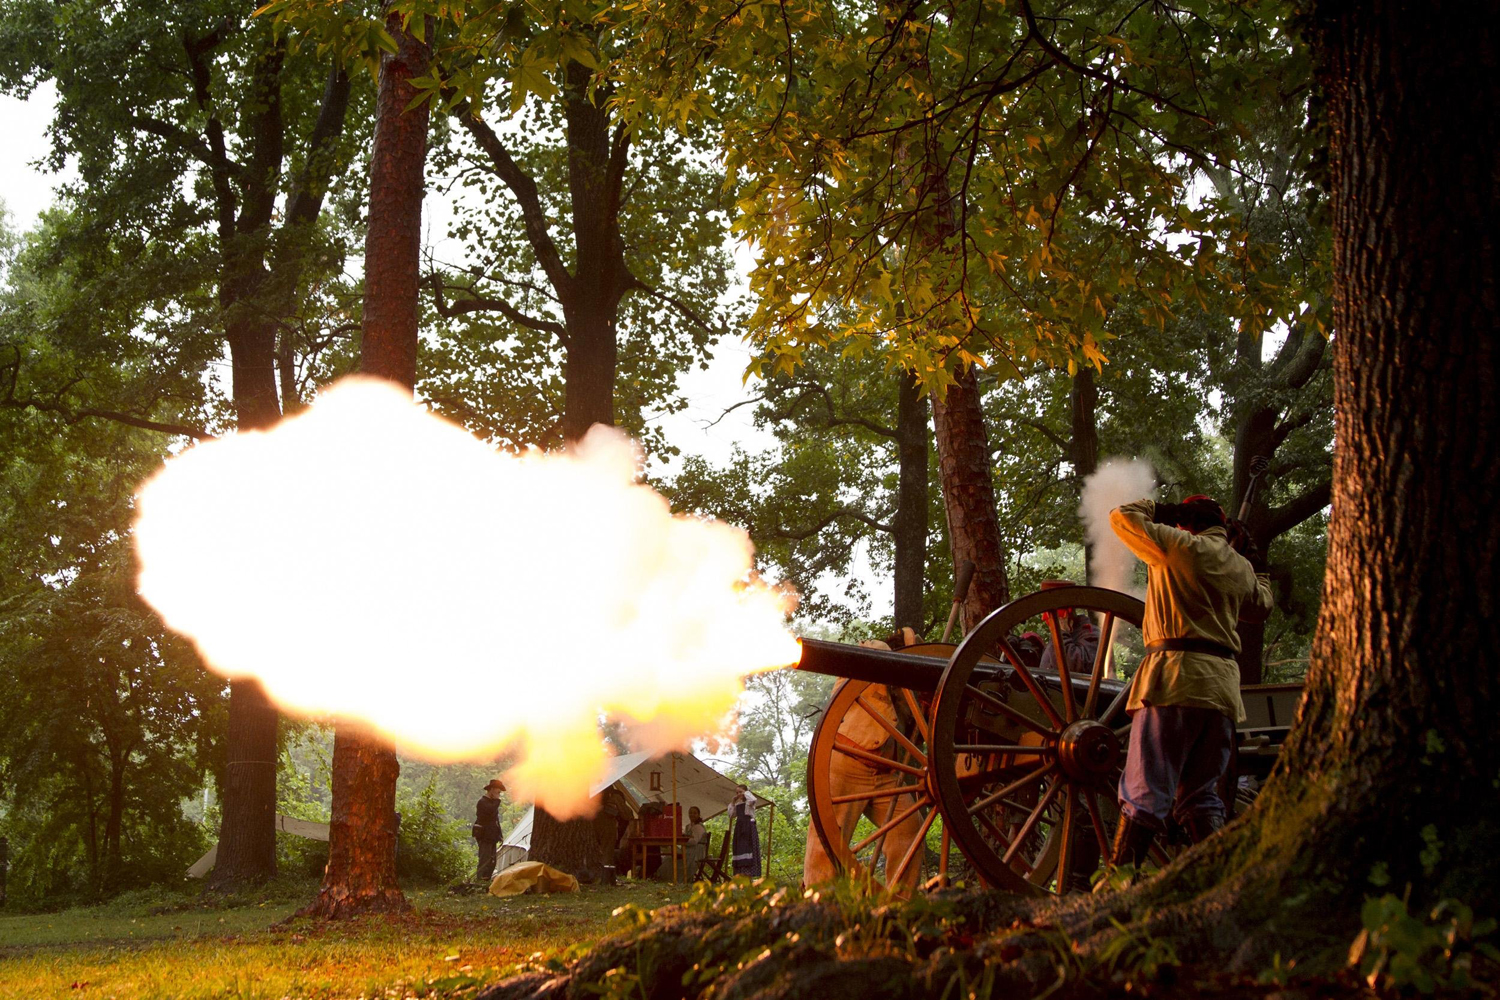 Civil War re-enactors fire a cannon every hour to commemorate the 150th anniversary of the Battle of Atlanta, in Atlanta